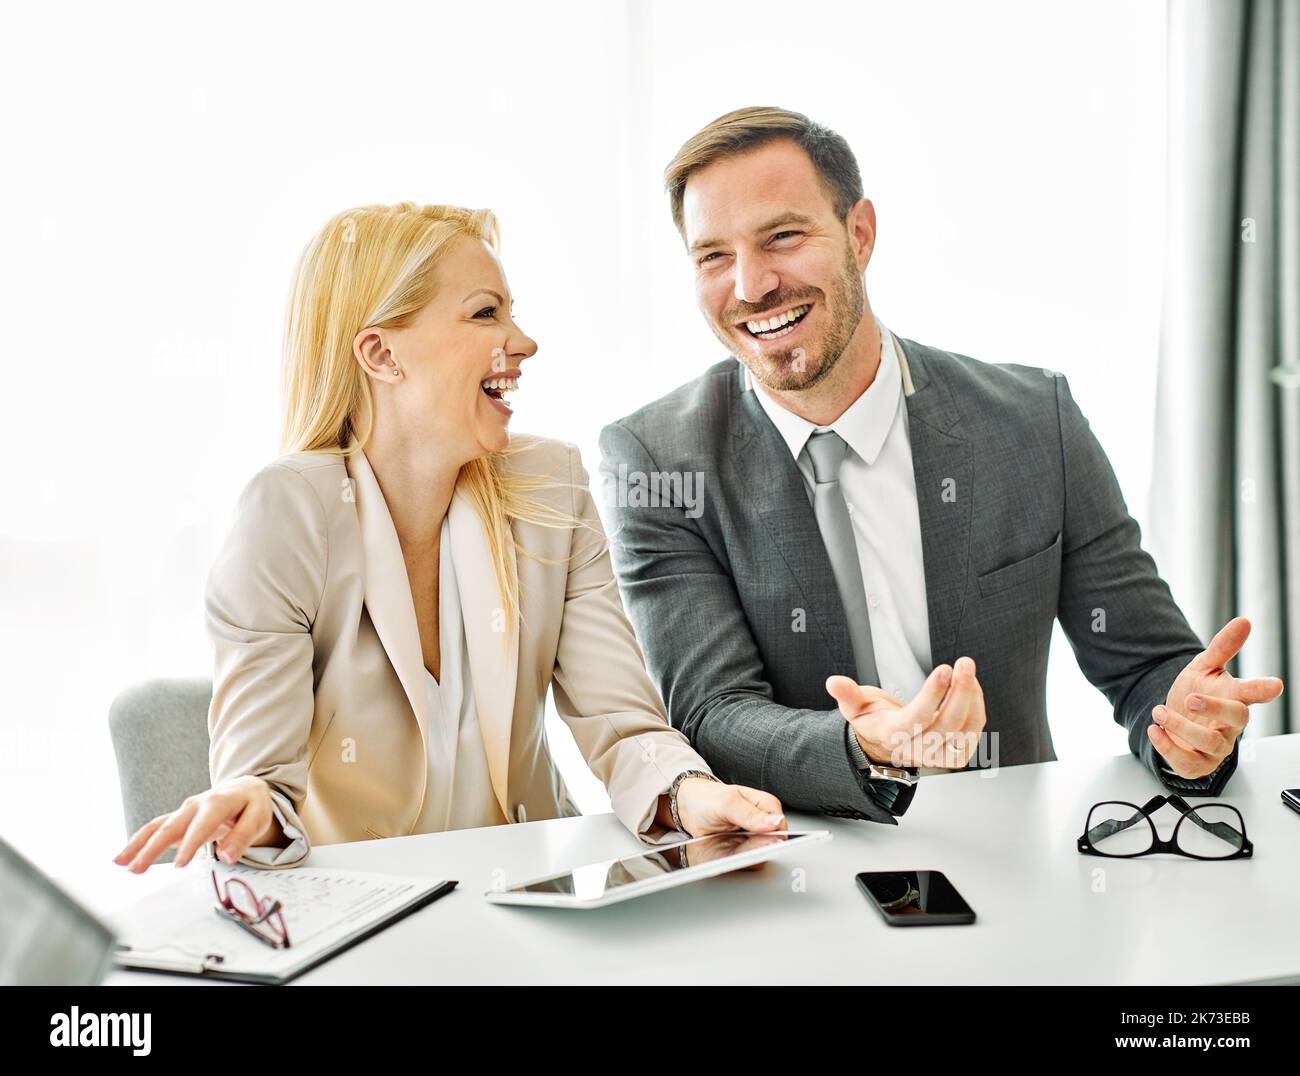 young business people meeting office teamwork success corporate discussion tablet businessman Stock Photo